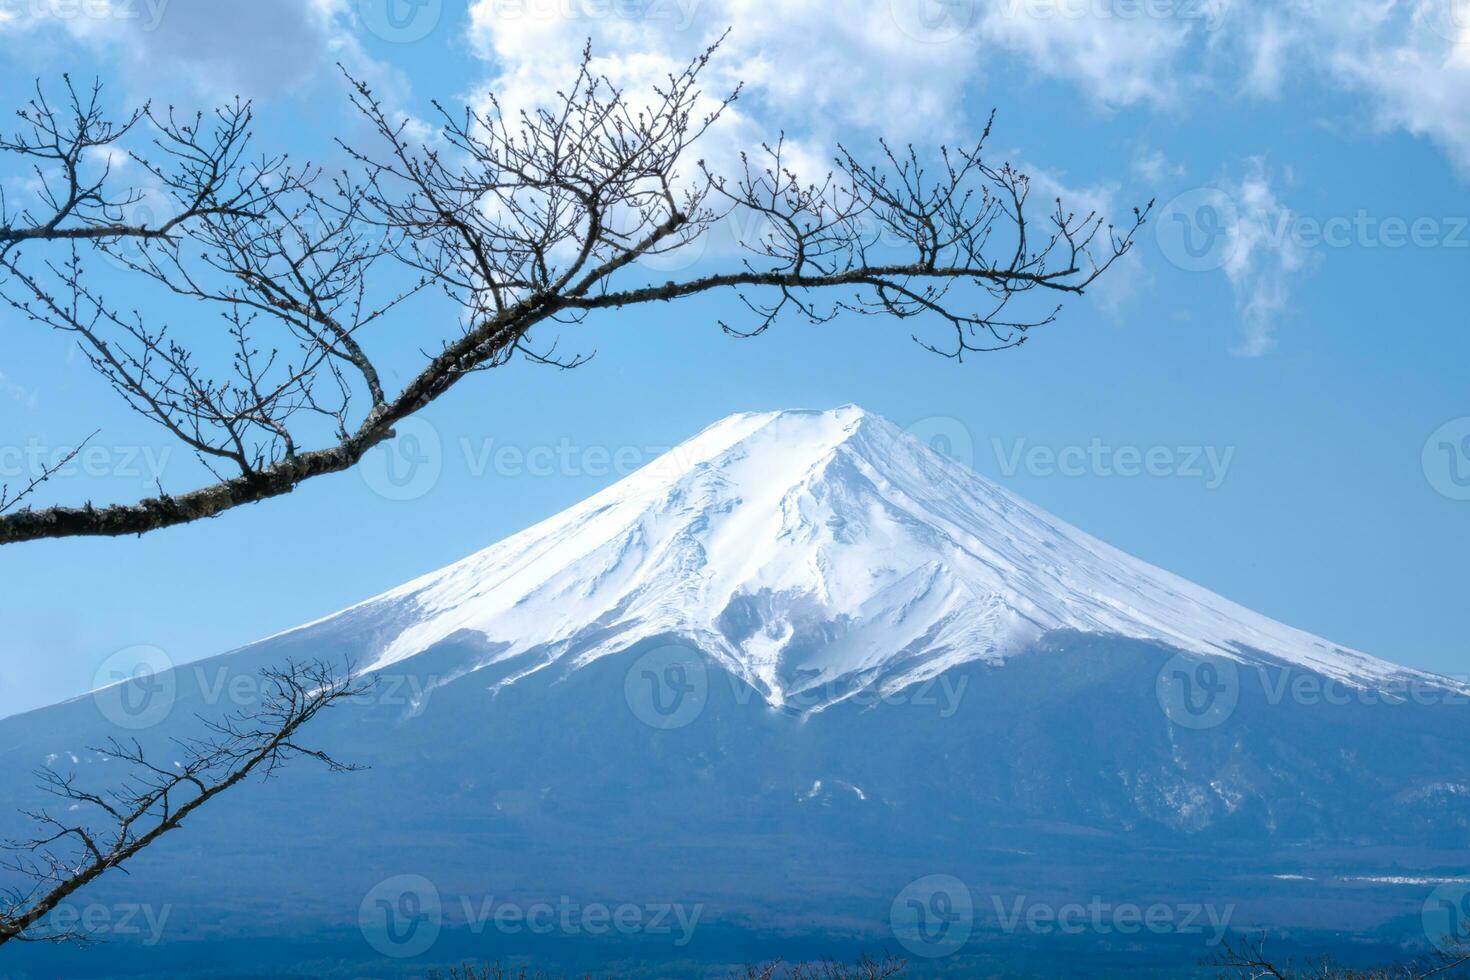 Mountain Fuji of snow on top in japan with blue sky and clouds view background photo